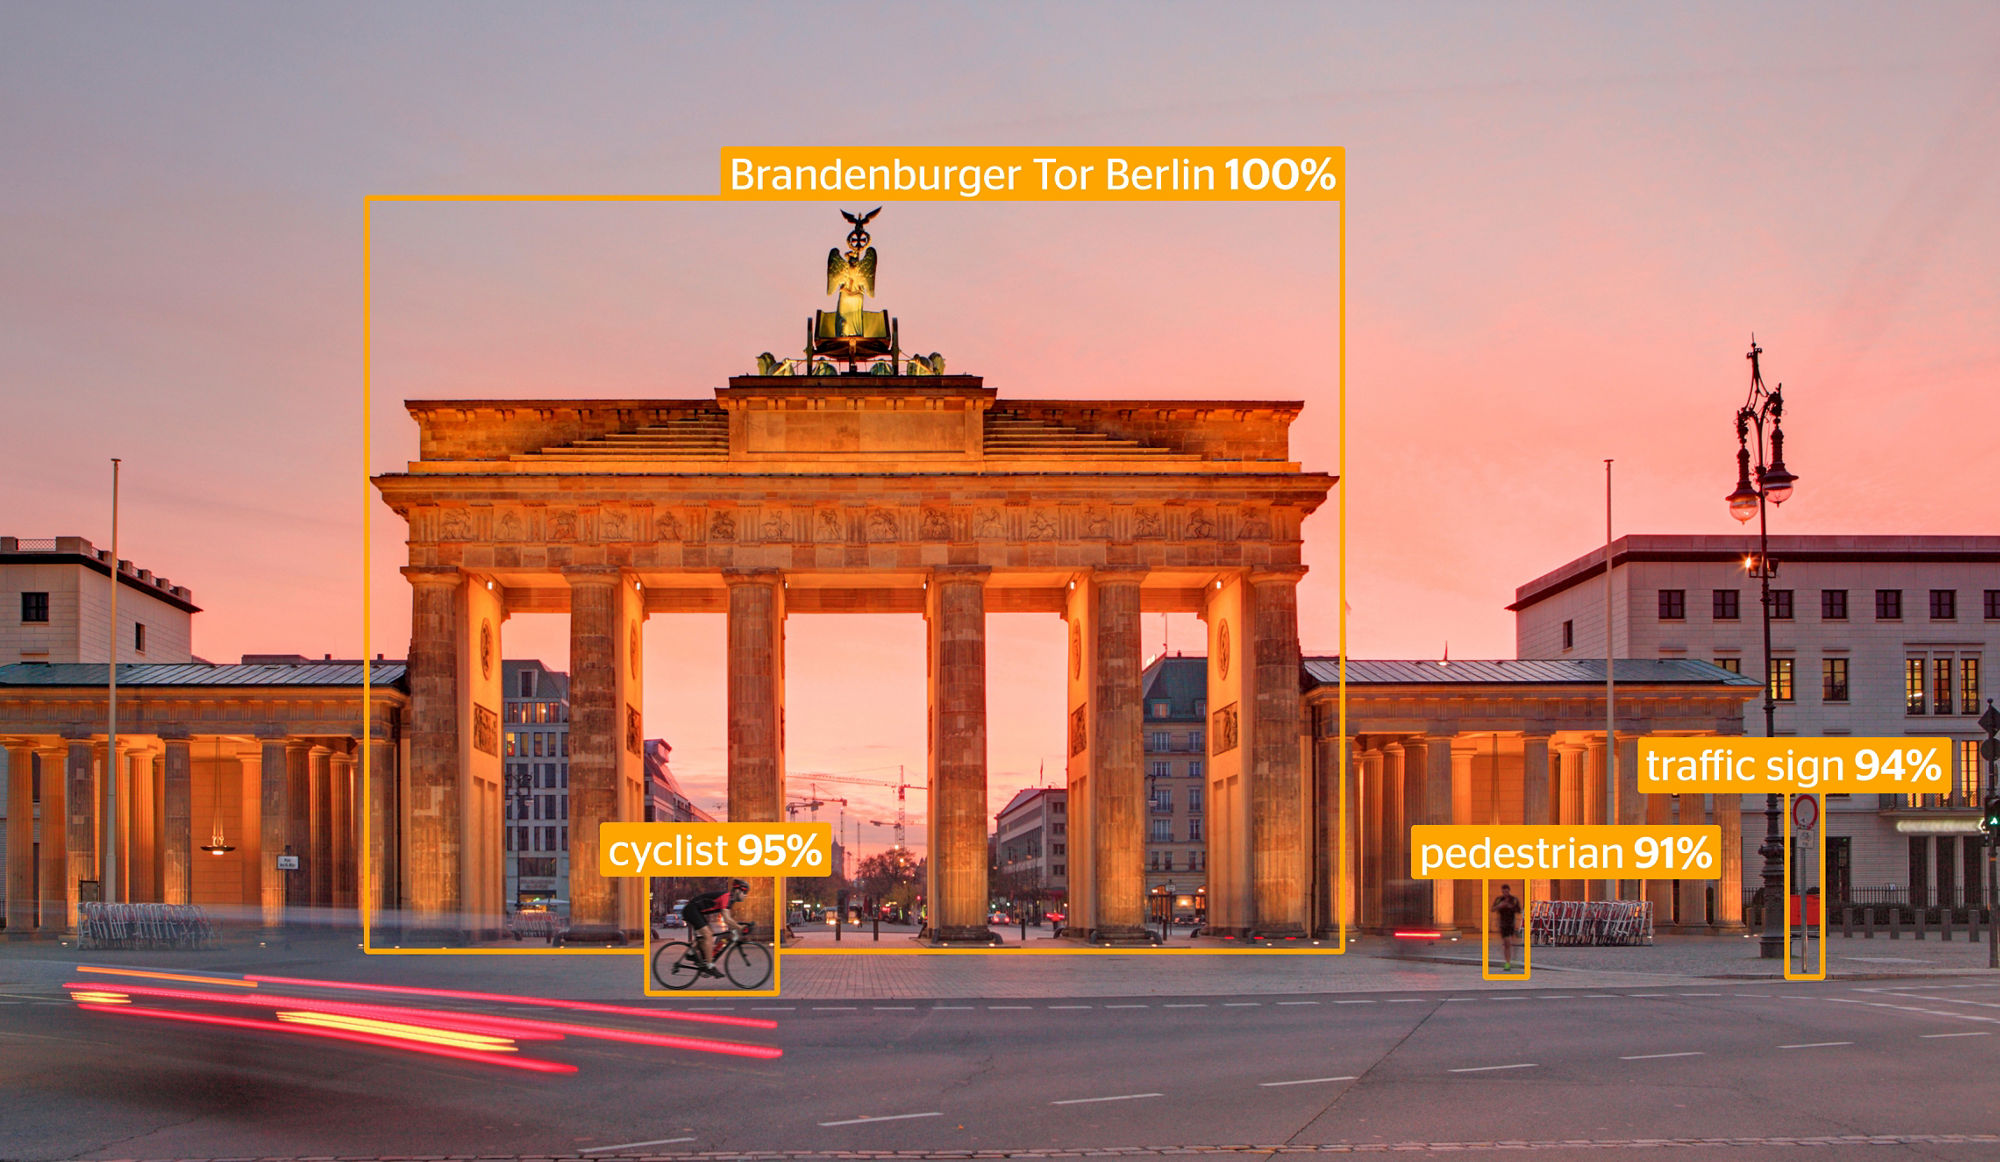 In Berlin, Continental is focusing on artificial intelligence for the mobility of the future.